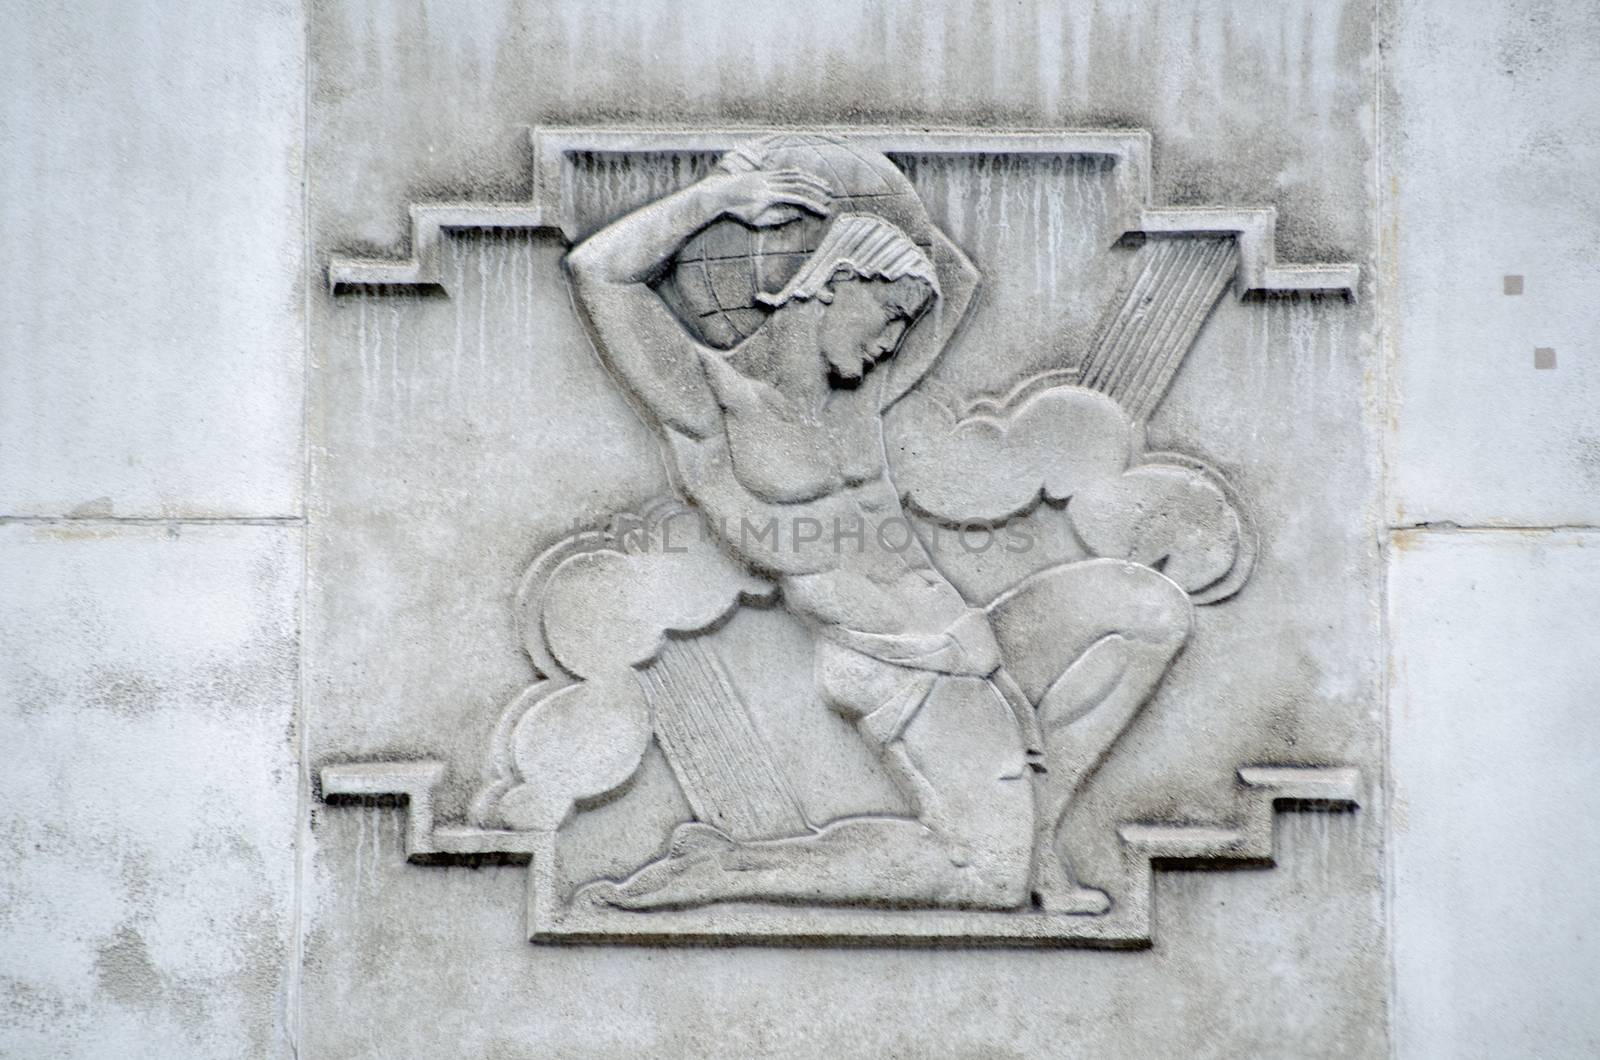 Sculpted stone relief of the Roman hero Atlas, holding the globe on his shoulders.  Exterior of a 1930's building originally constructed as the headquarters of the British Iron and Steel Federation in Westminster, London.  Sculpted by William Aumonier junior in 1937, viewed from public road.